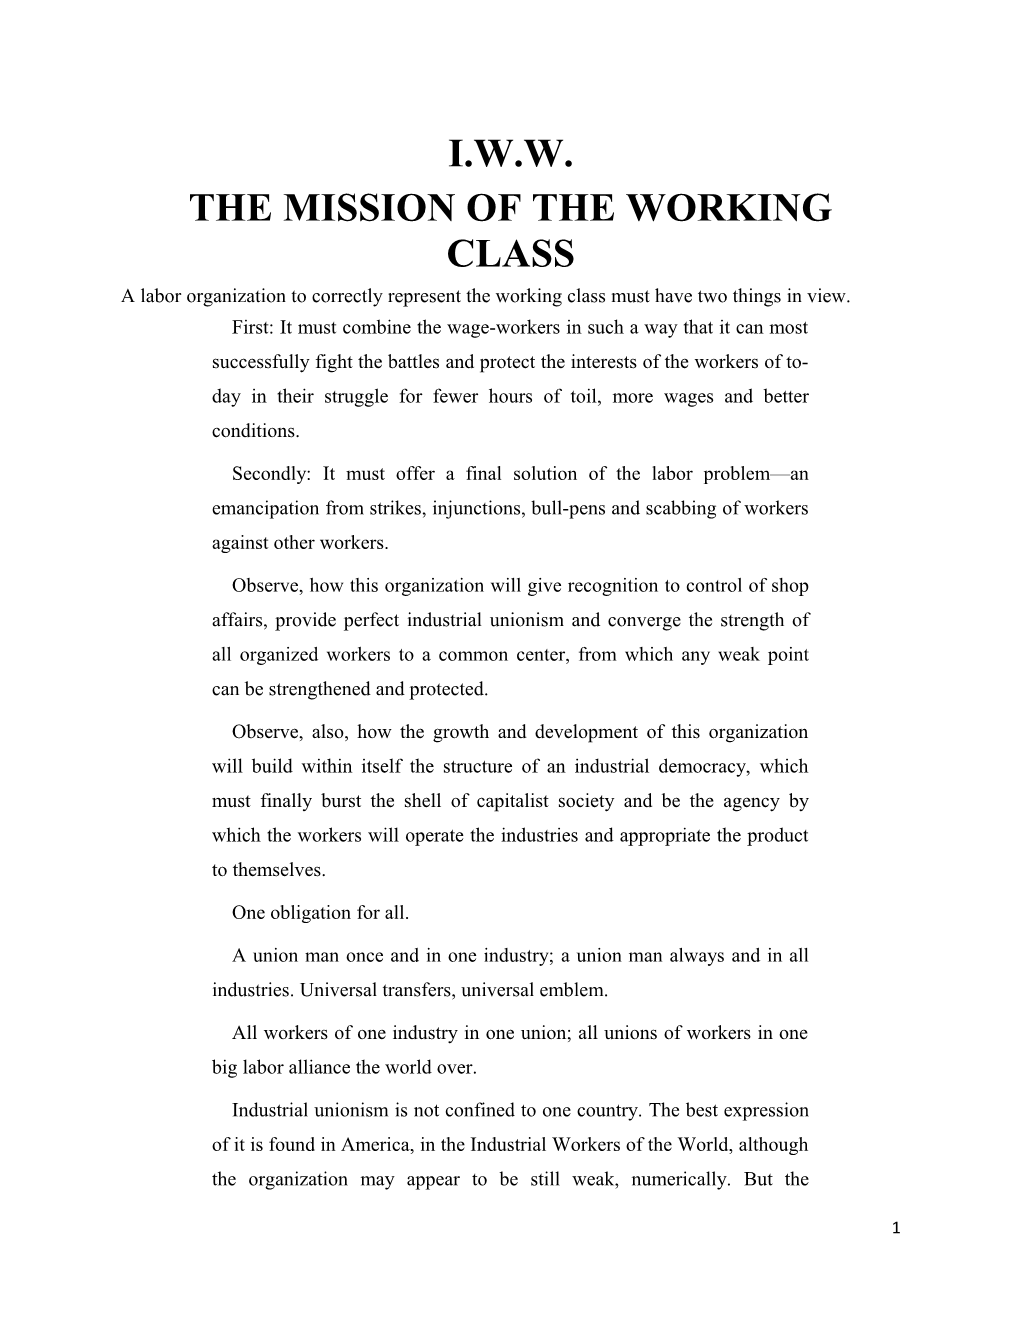 The Mission of the Working Class